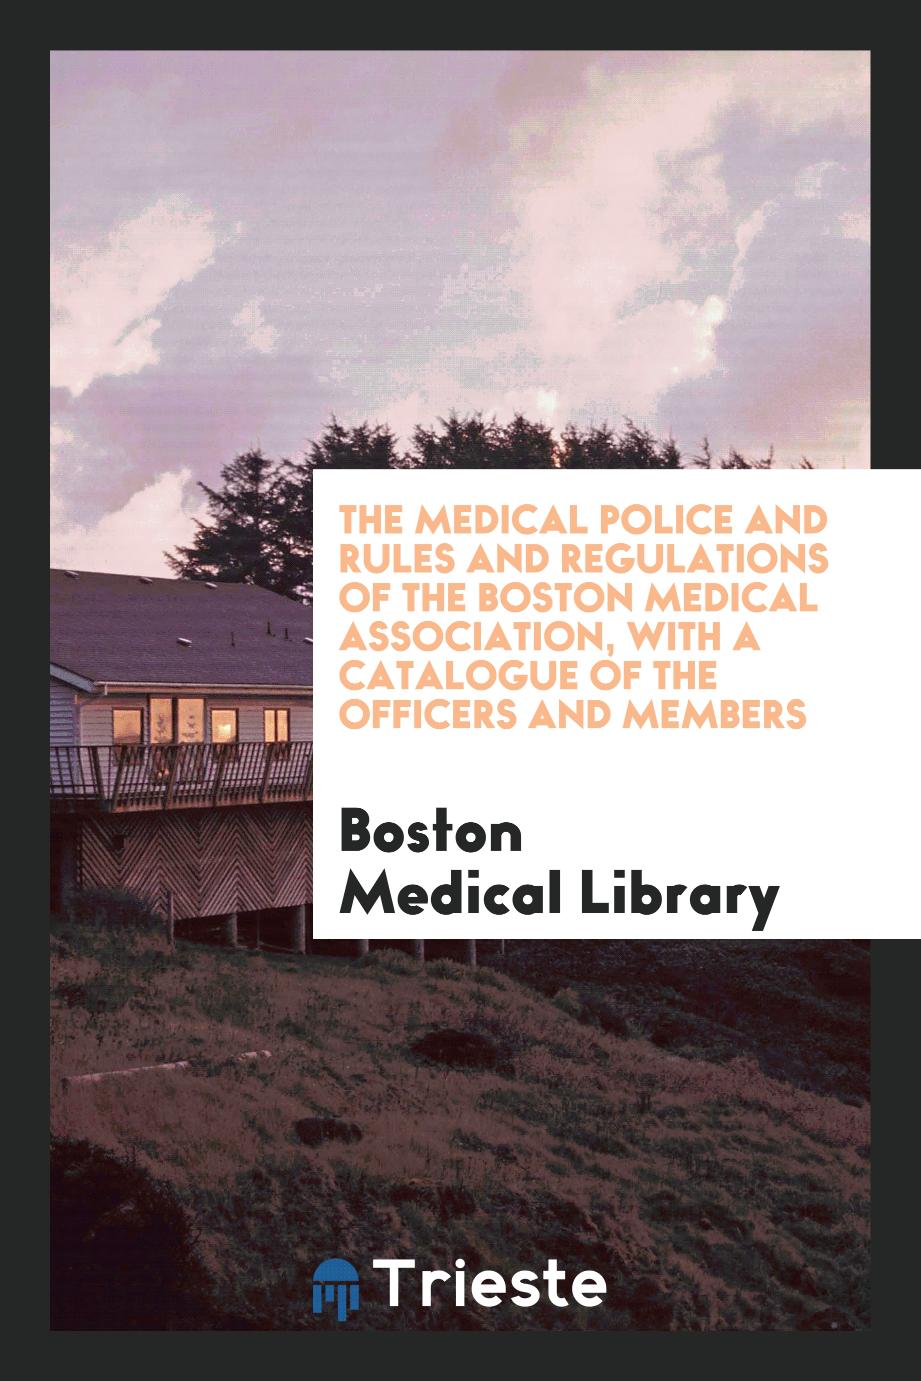 The Medical police and rules and regulations of the Boston Medical Association, with a catalogue of the officers and members